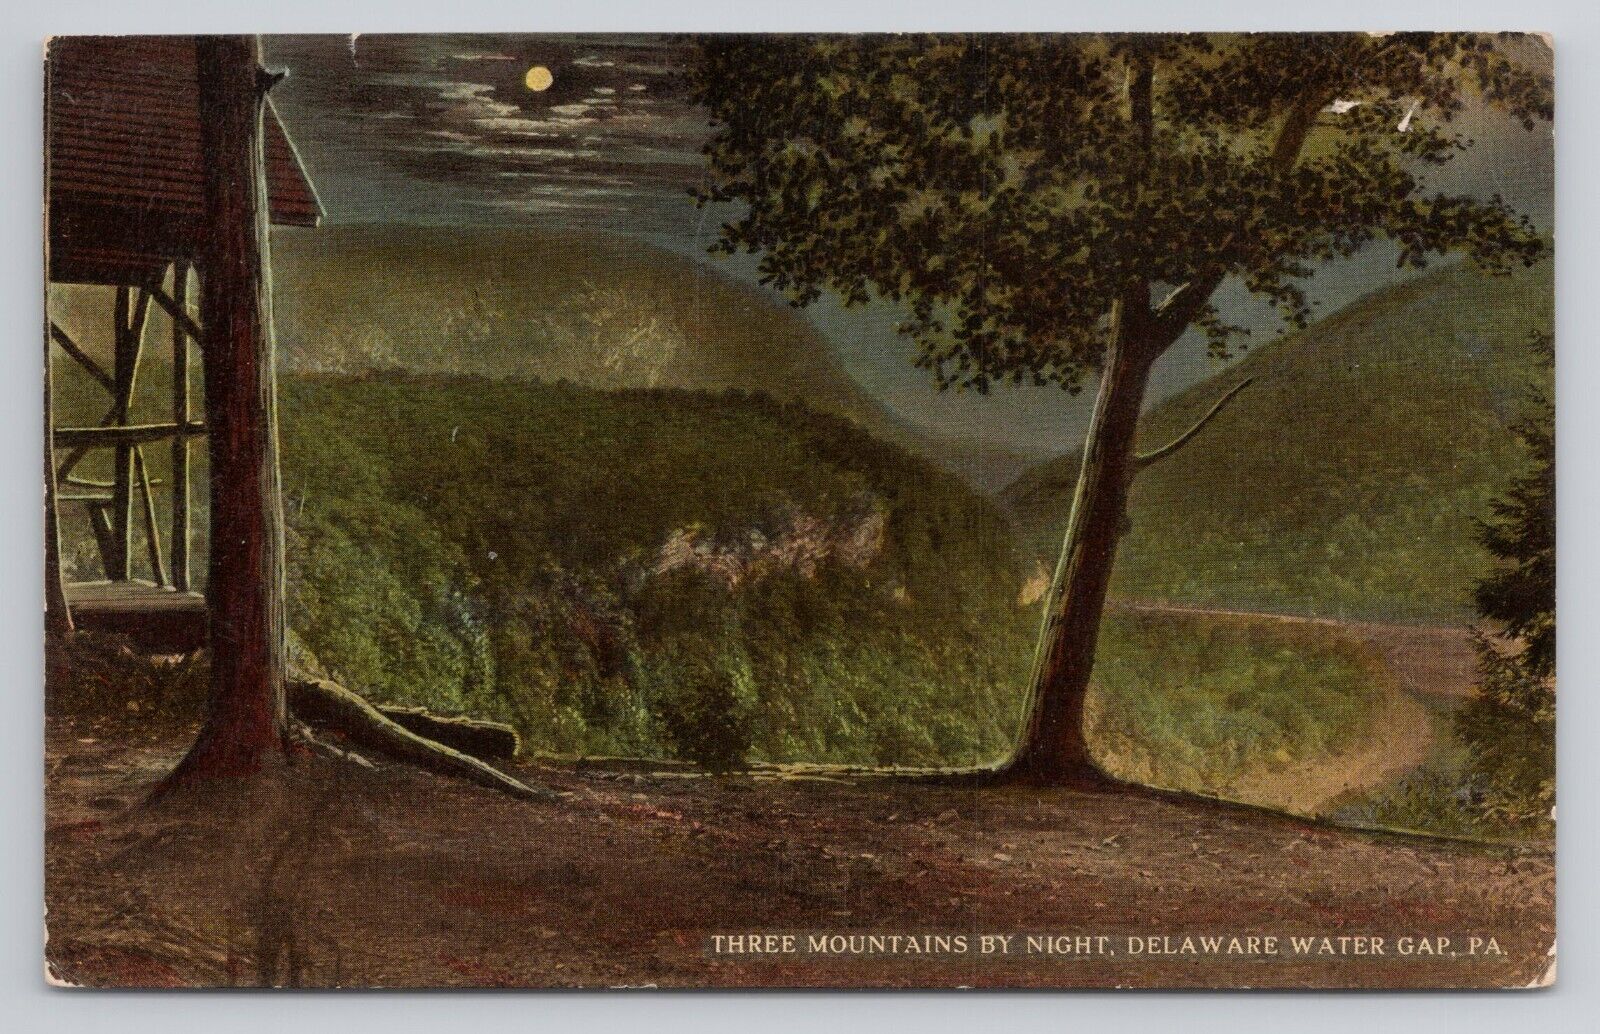 Three Mountains By Night Delaware Water Gap Pennsylvania c1910 Antique Postcard